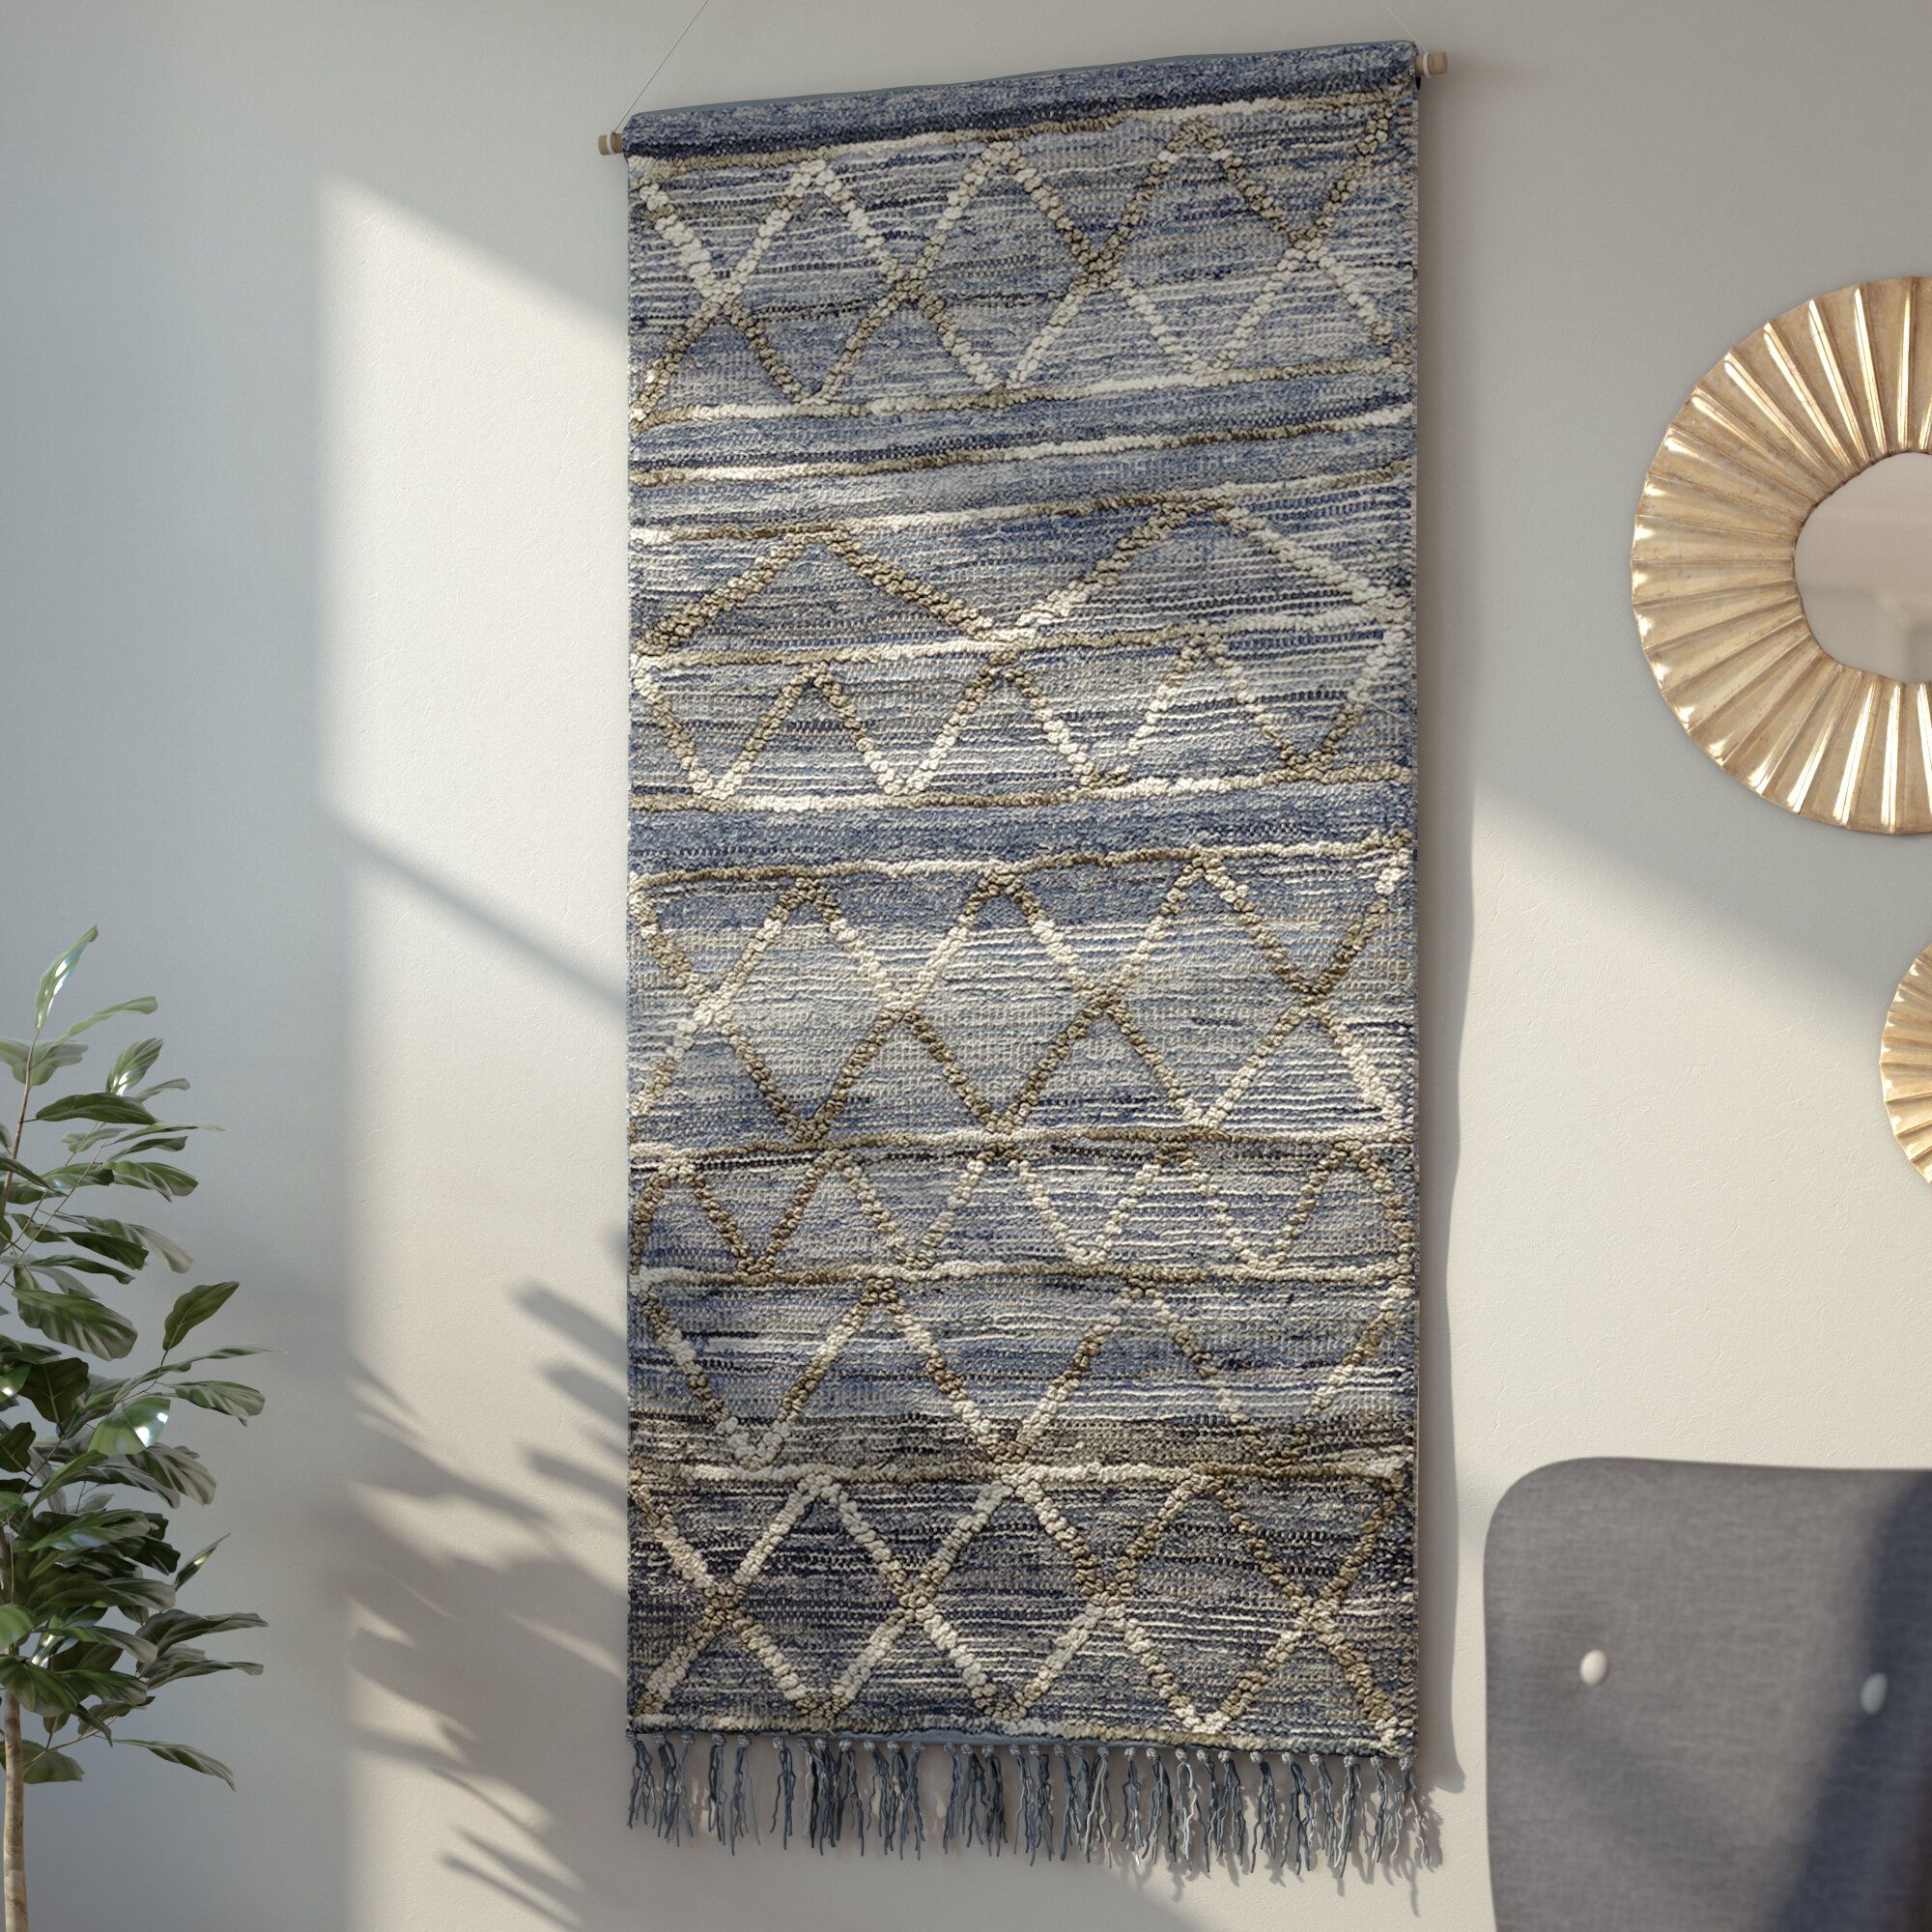 Blended Fabric Wall Hanging With Hanging Accessories Regarding Most Current Blended Fabric In His Tapestries And Wall Hangings (View 1 of 20)